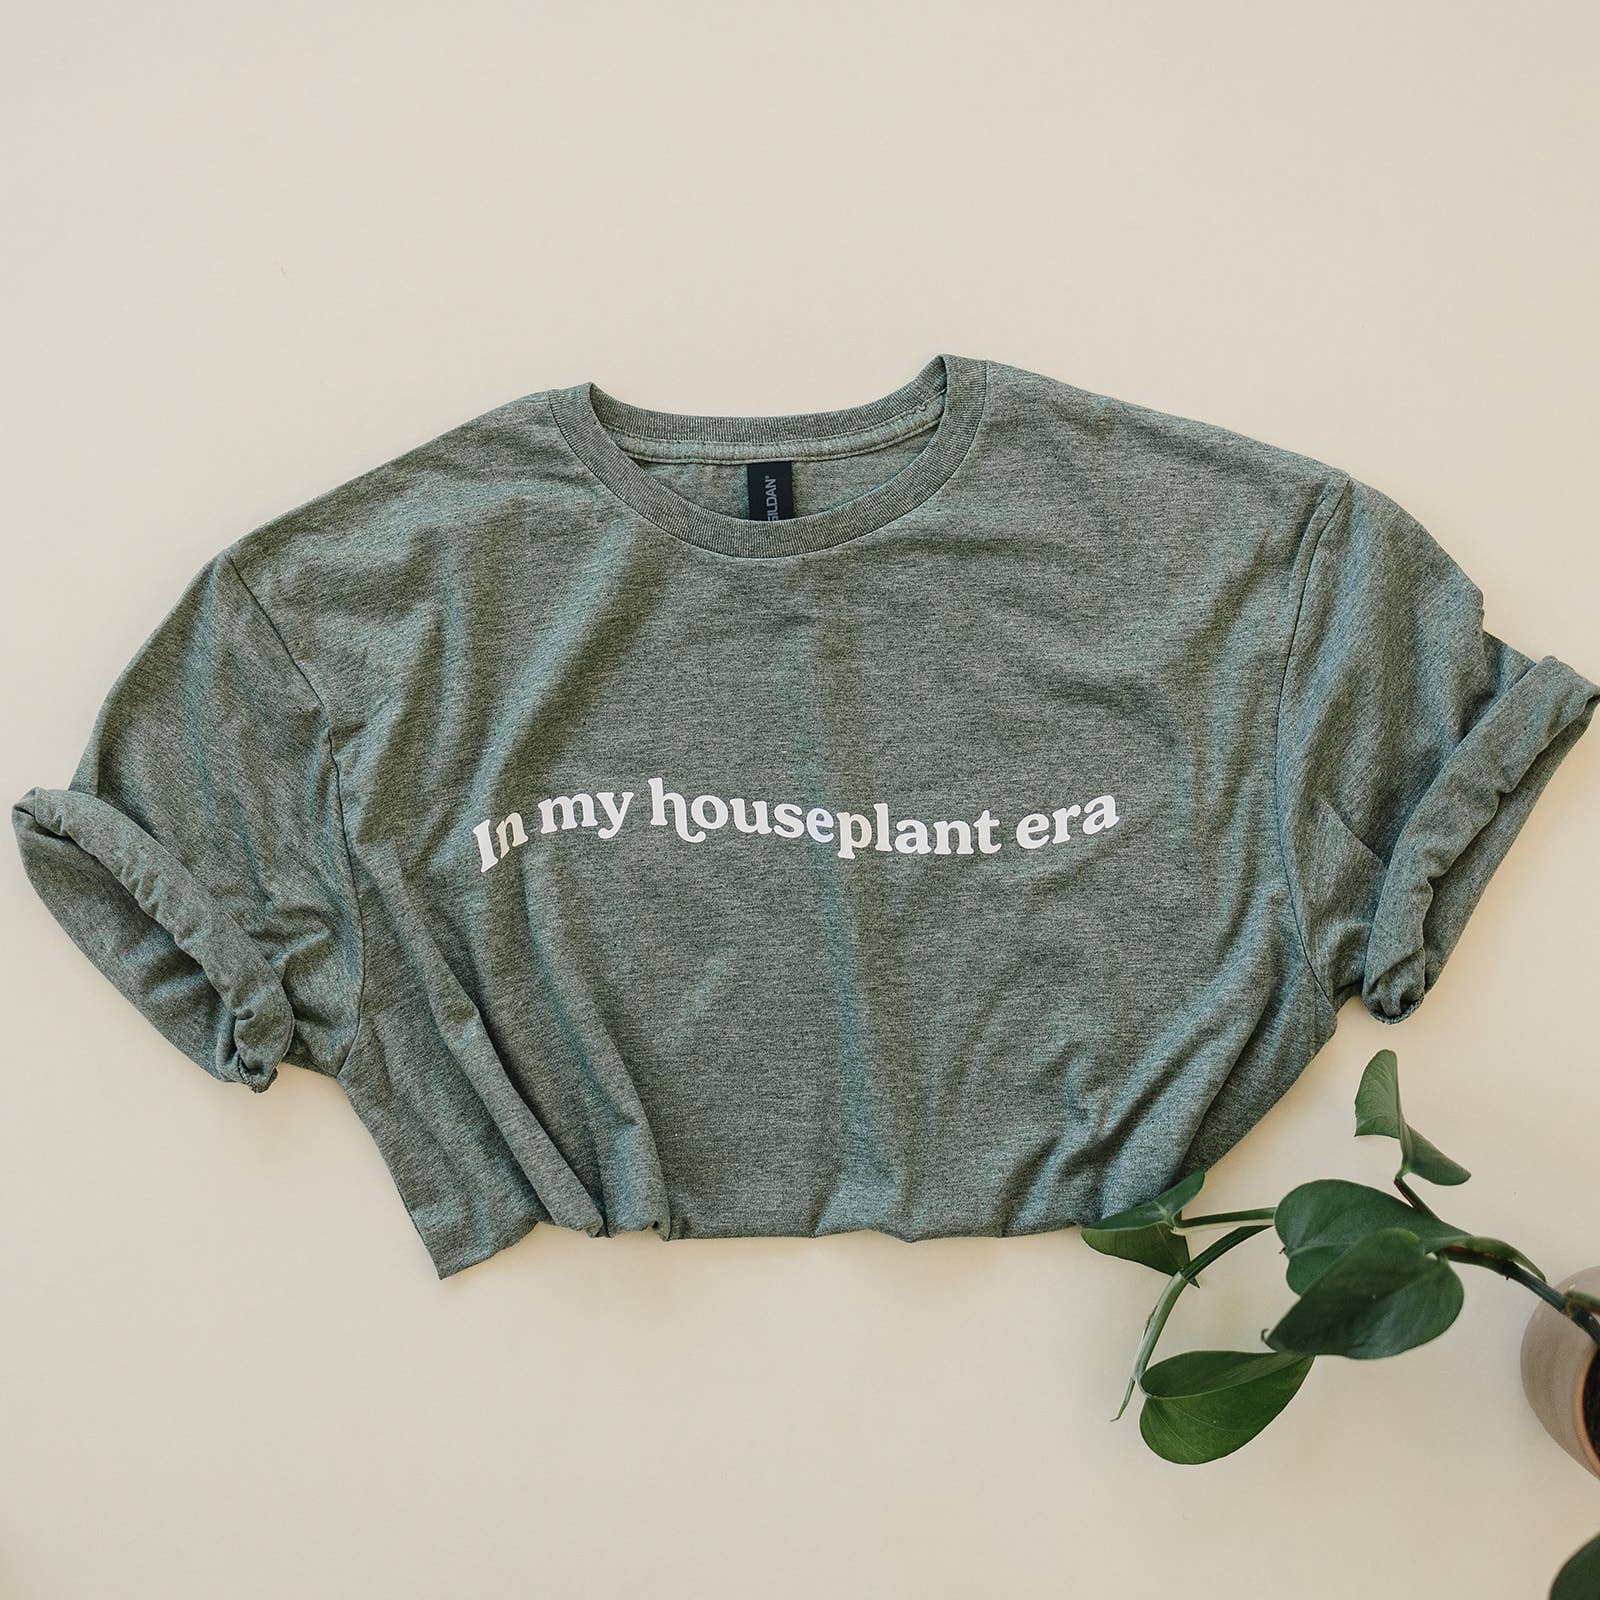 Packer Plant Co - Houseplant Era Graphic T-Shirt | Gifts for Plant Lovers: Heather Military Green / Medium